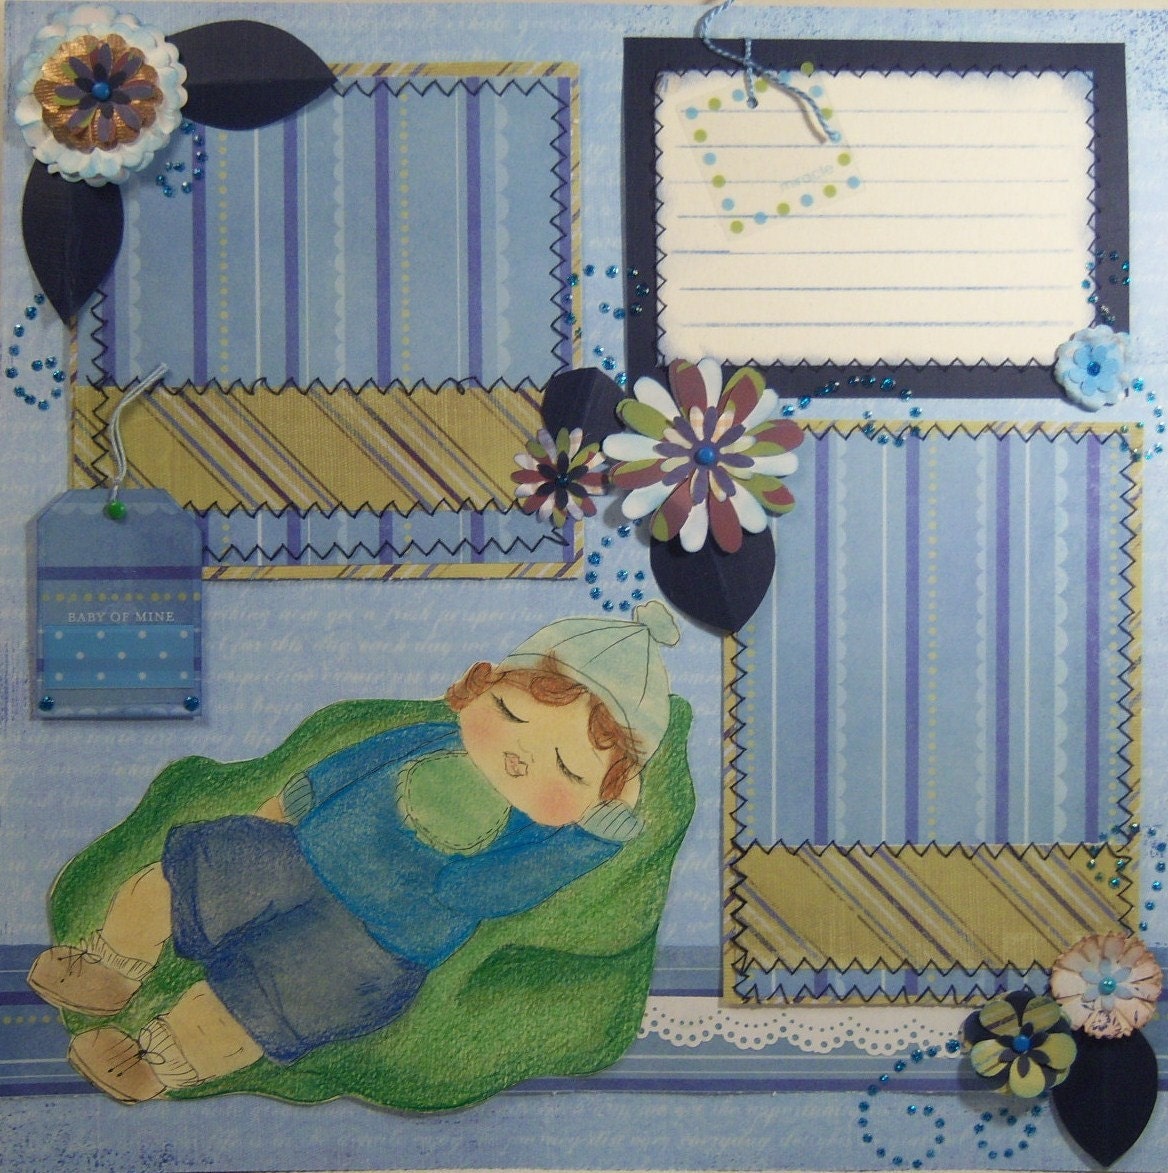 Bundle of Joy Miracle Baby Boy Premade Two Pages Layout for Scrapbook Album